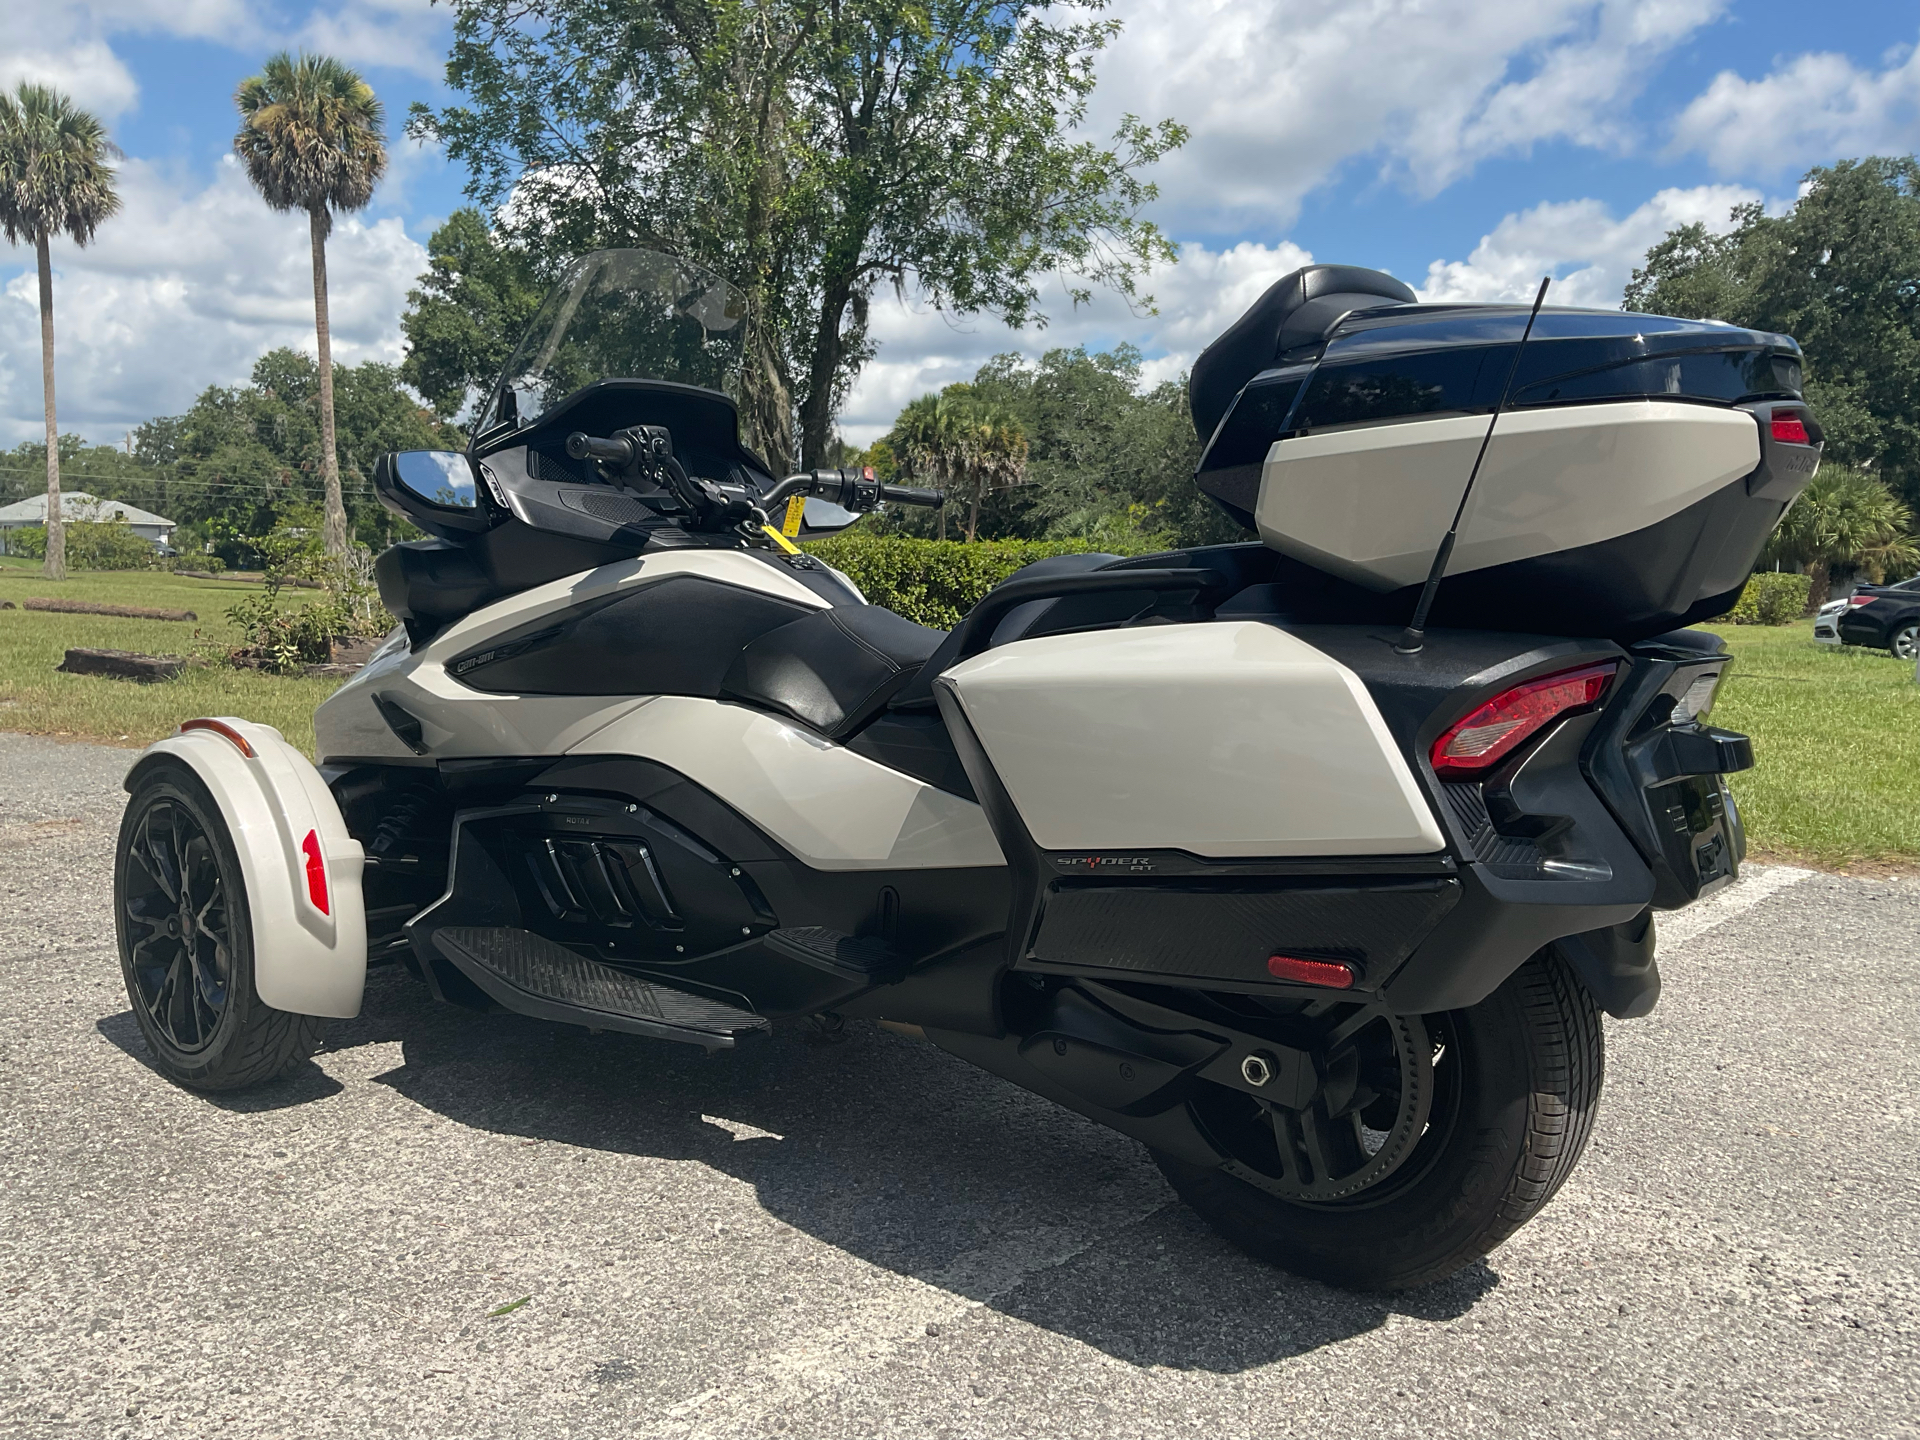 2020 Can-Am Spyder RT Limited in Sanford, Florida - Photo 8